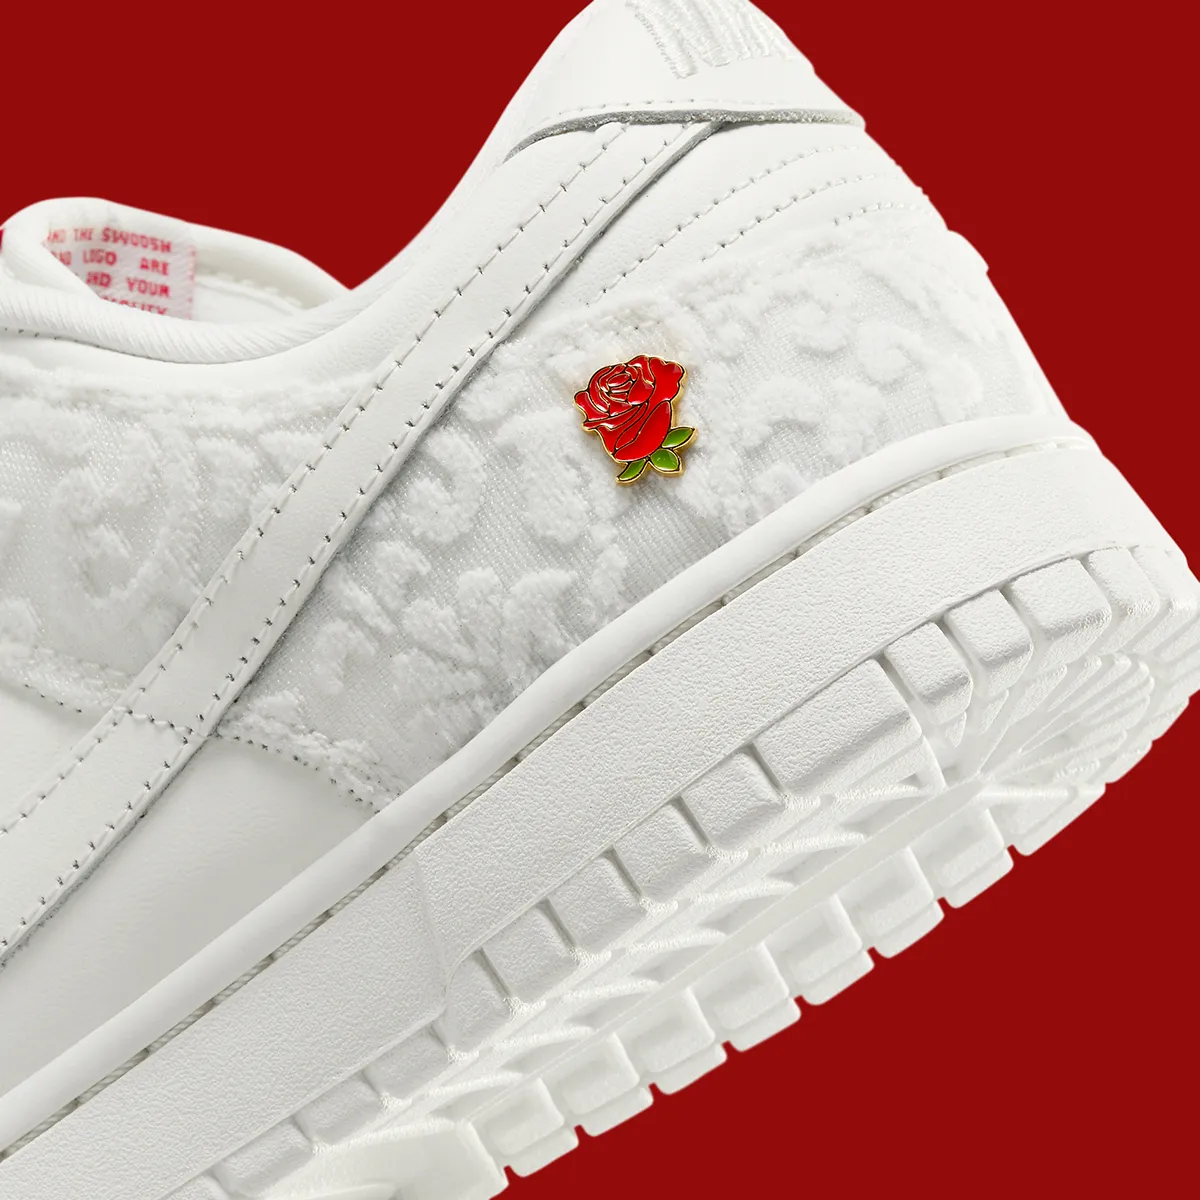 nike-dunk-low-you-deserve-flowers-valentines-day-2